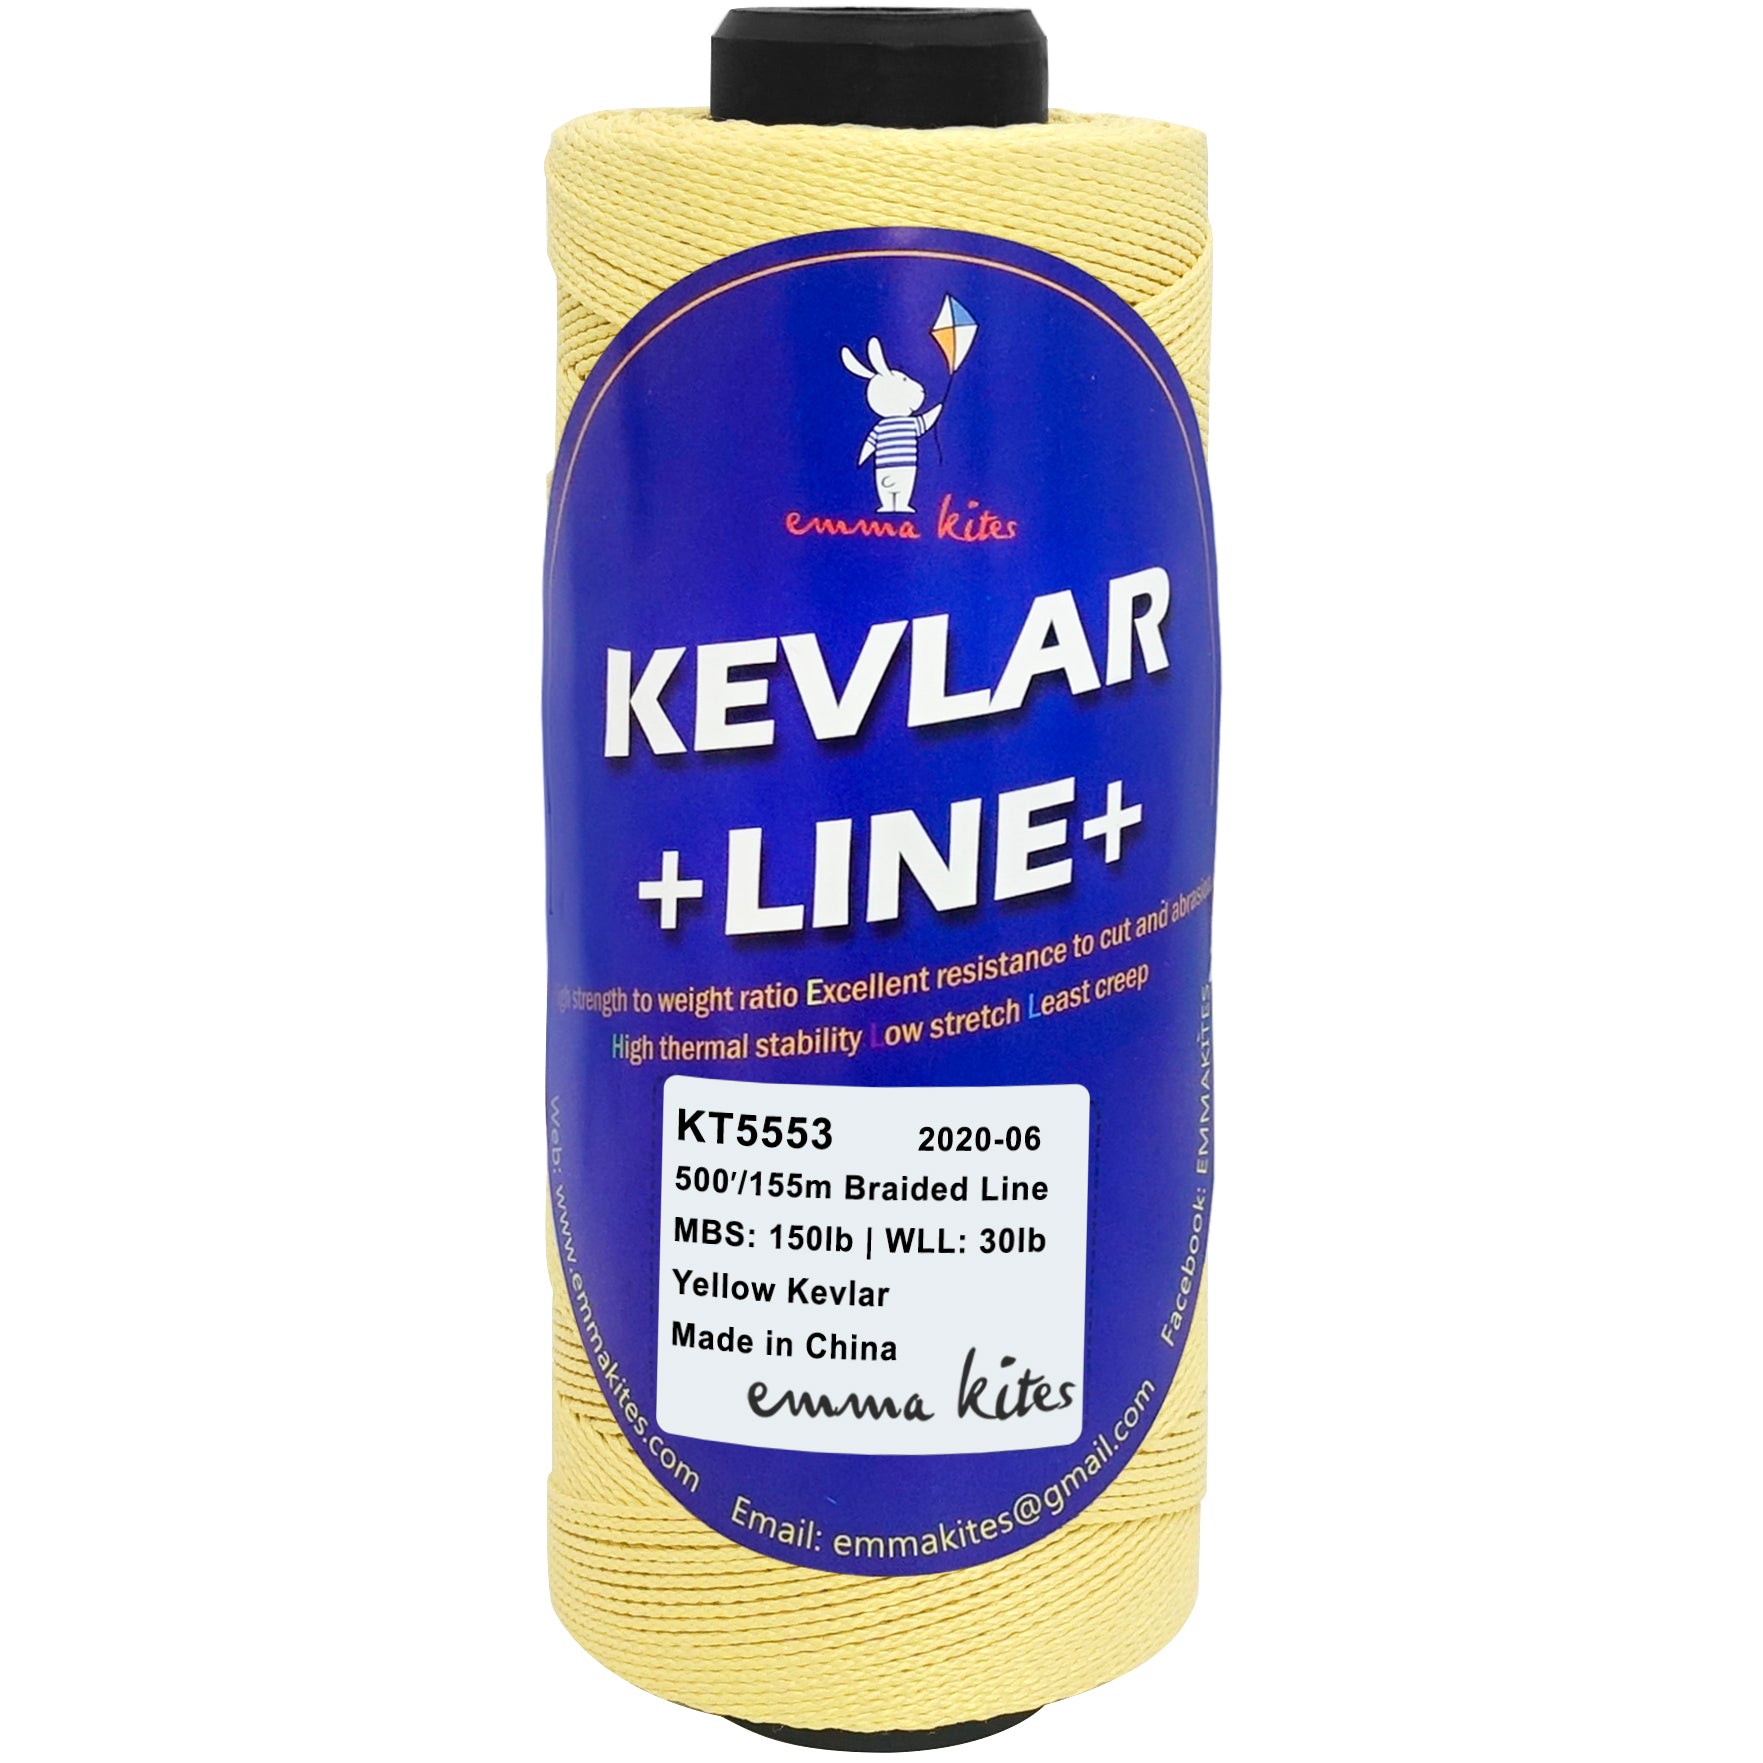 Braided Kevlar Line Fishing Assist Line Kite String Made with